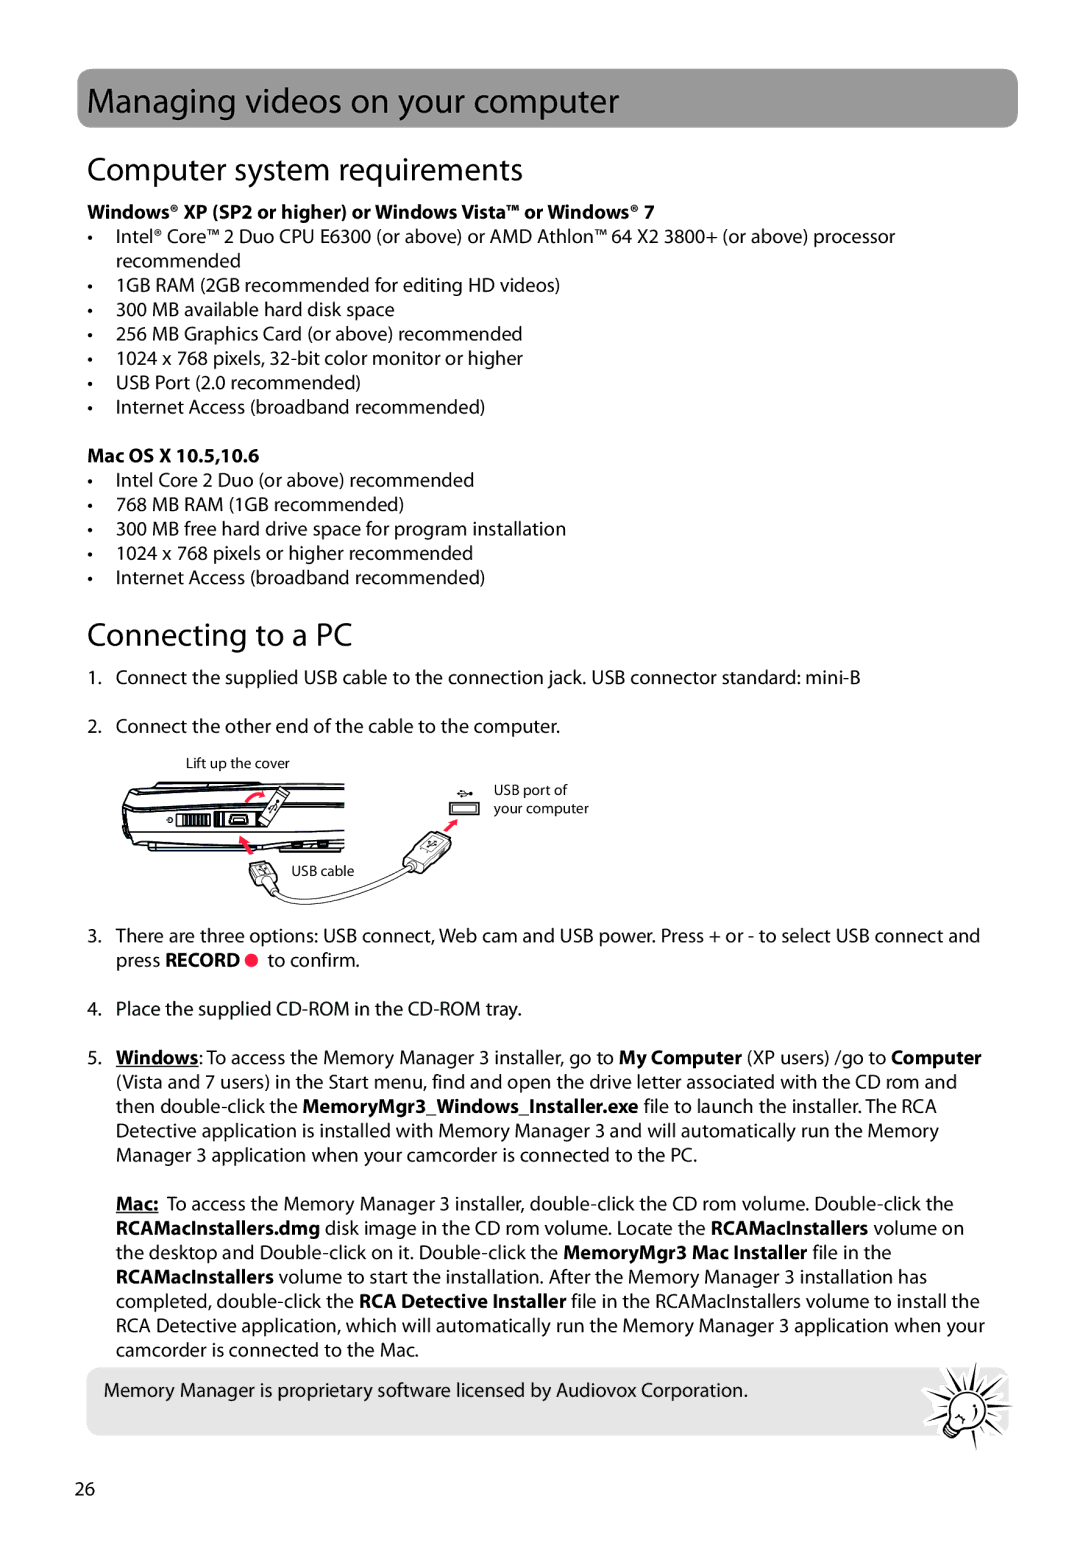 RCA EZ2050 Managing videos on your computer, Computer system requirements, Connecting to a PC, Mac OS X 10.5,10.6 